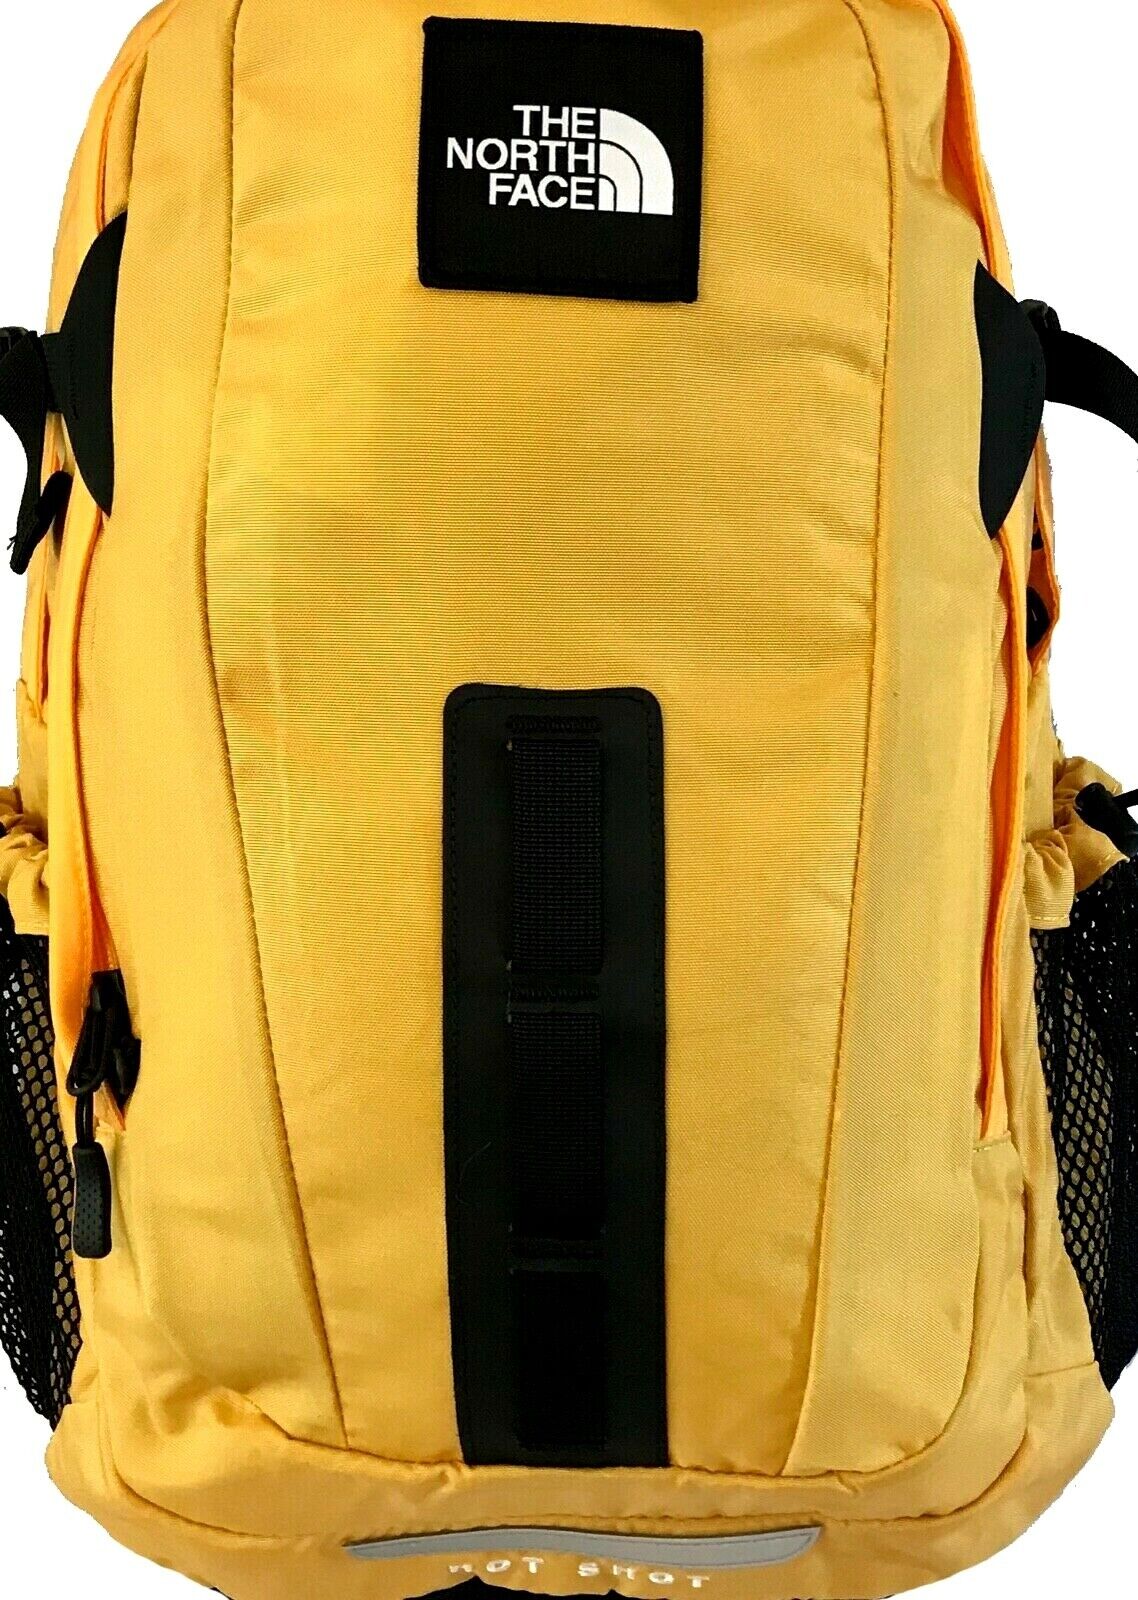 The North Face Hot Shot SE Retro Yellow Backpack With Classic Features